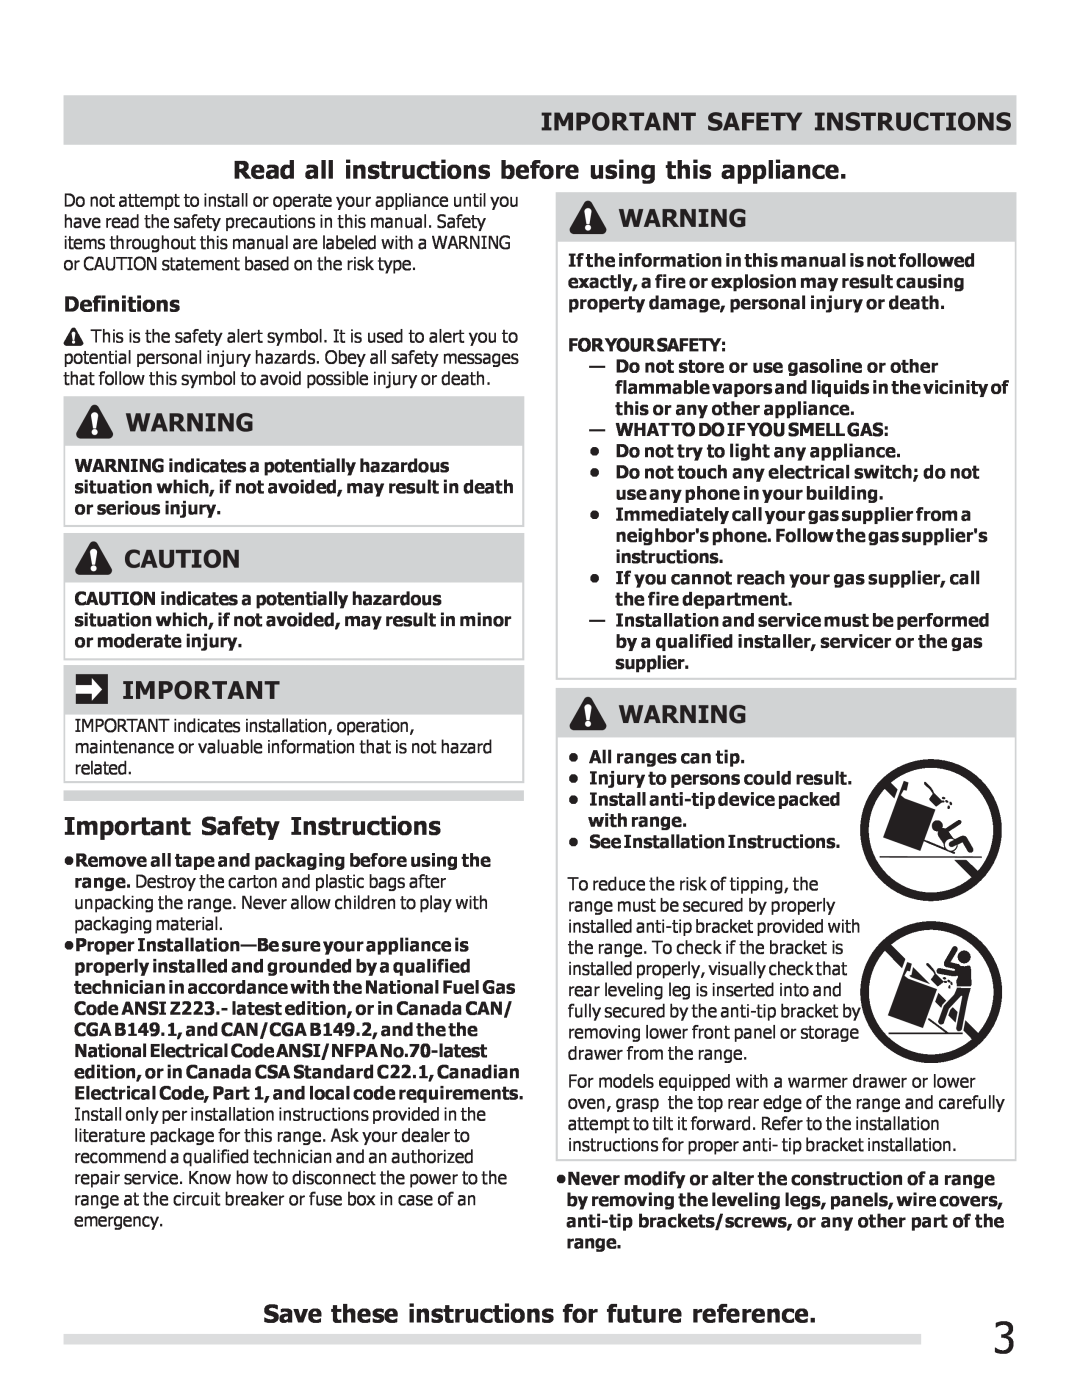 Frigidaire 316901202 manual Important Safety Instructions, Read all instructions before using this appliance, Definitions 